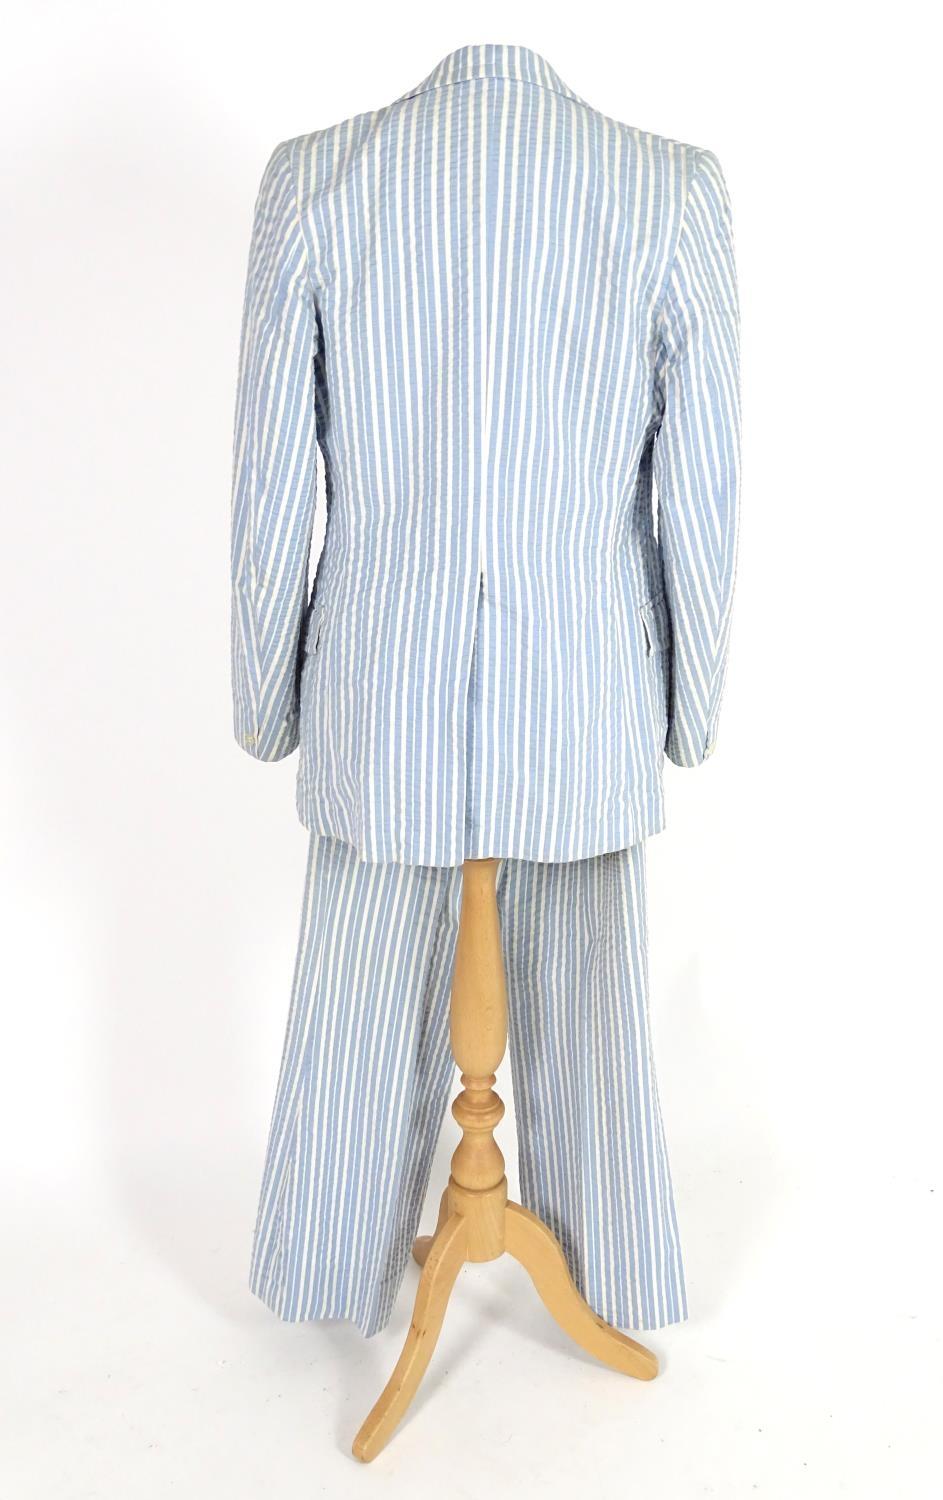 2 vintage stripy suits by Austins, a light brown and cream striped jacket and trousers along with - Image 2 of 10